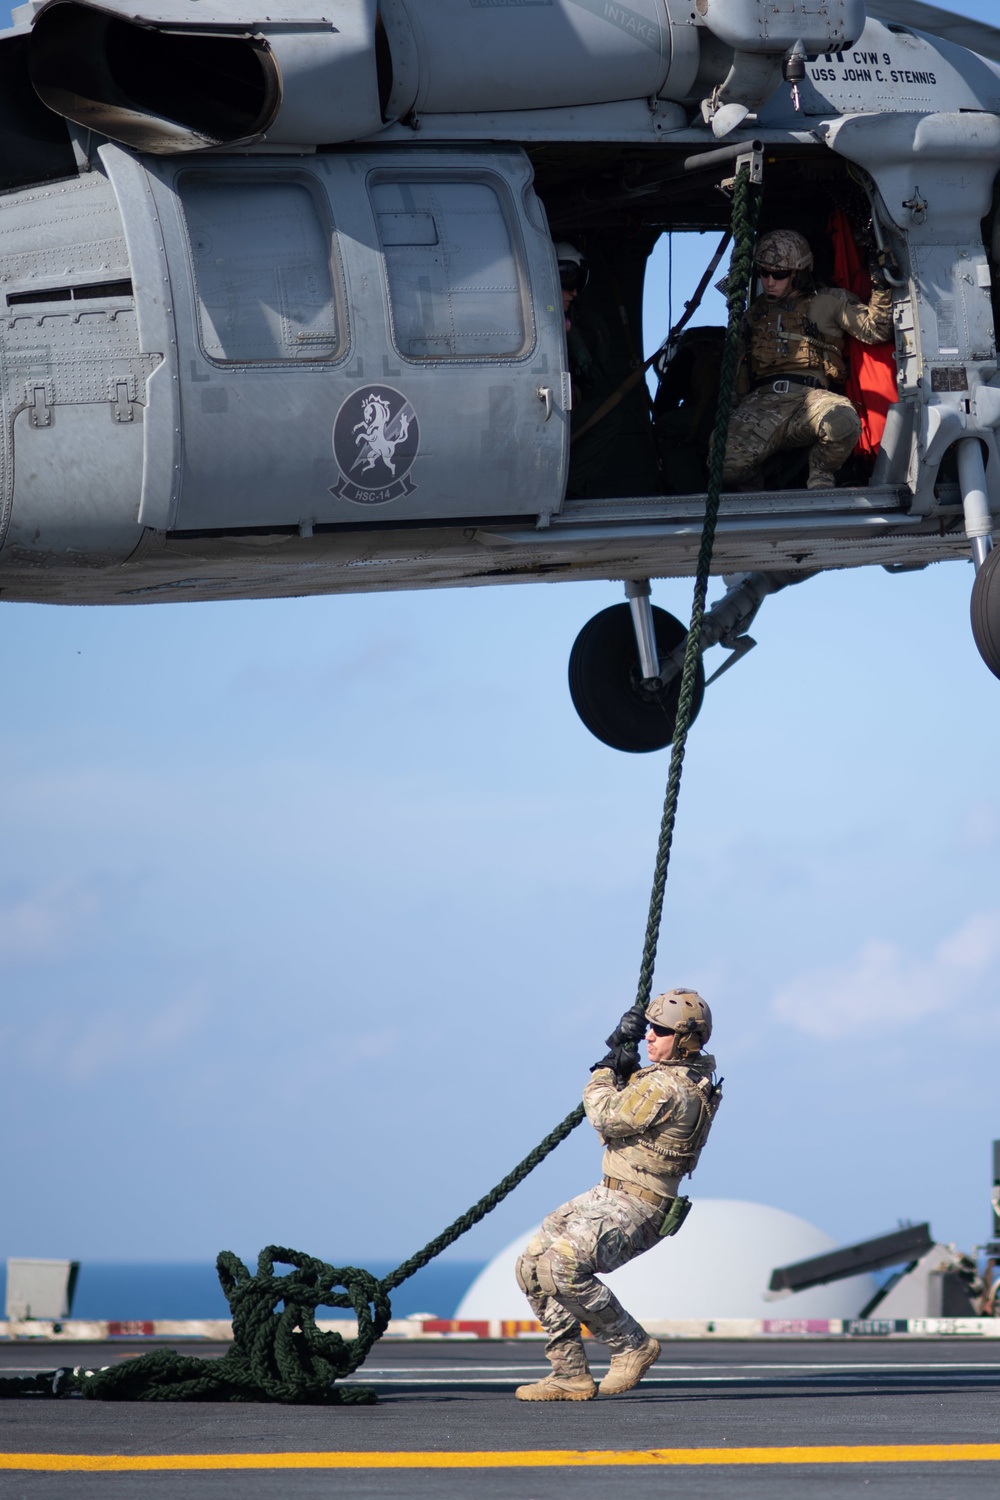 DVIDS - Images - U.S. Sailors conduct fast rope exercise [Image 1 of 11]